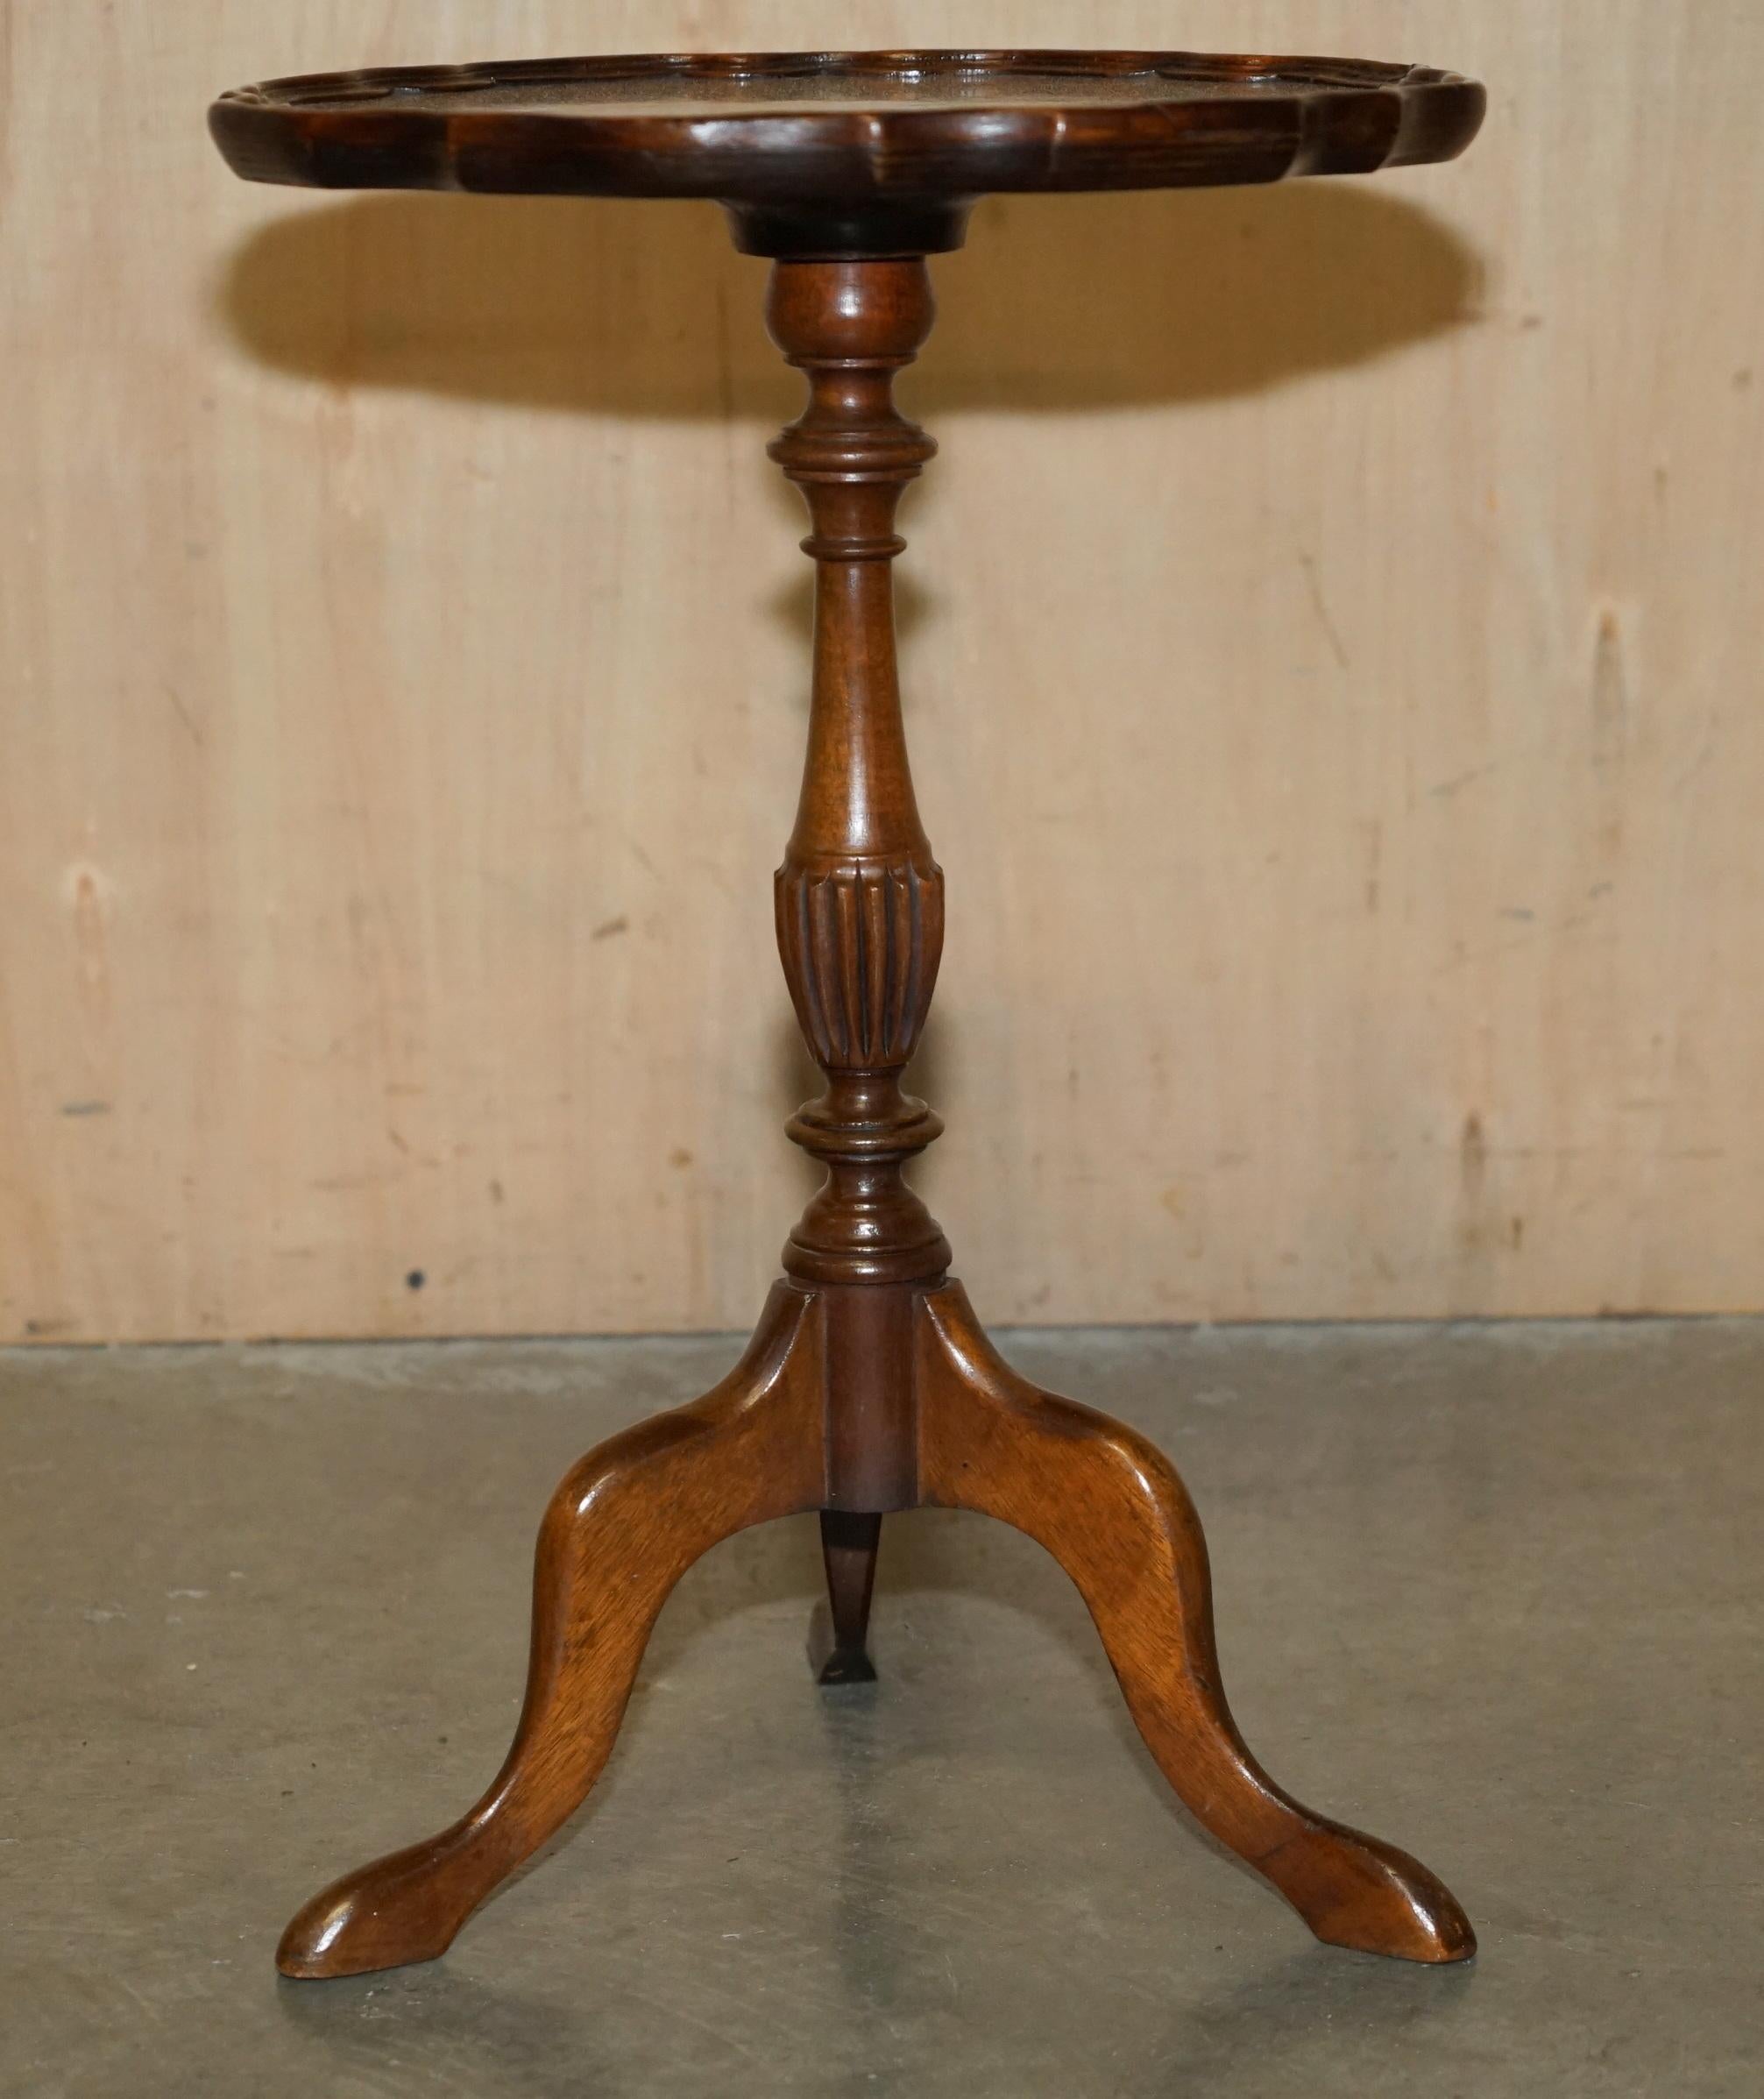 FULLY RESTORED SUBLIME ANTIQUE CIRCA 1920 BURR WALNUT TRIPOD SiDE END LAMP TABLE 2